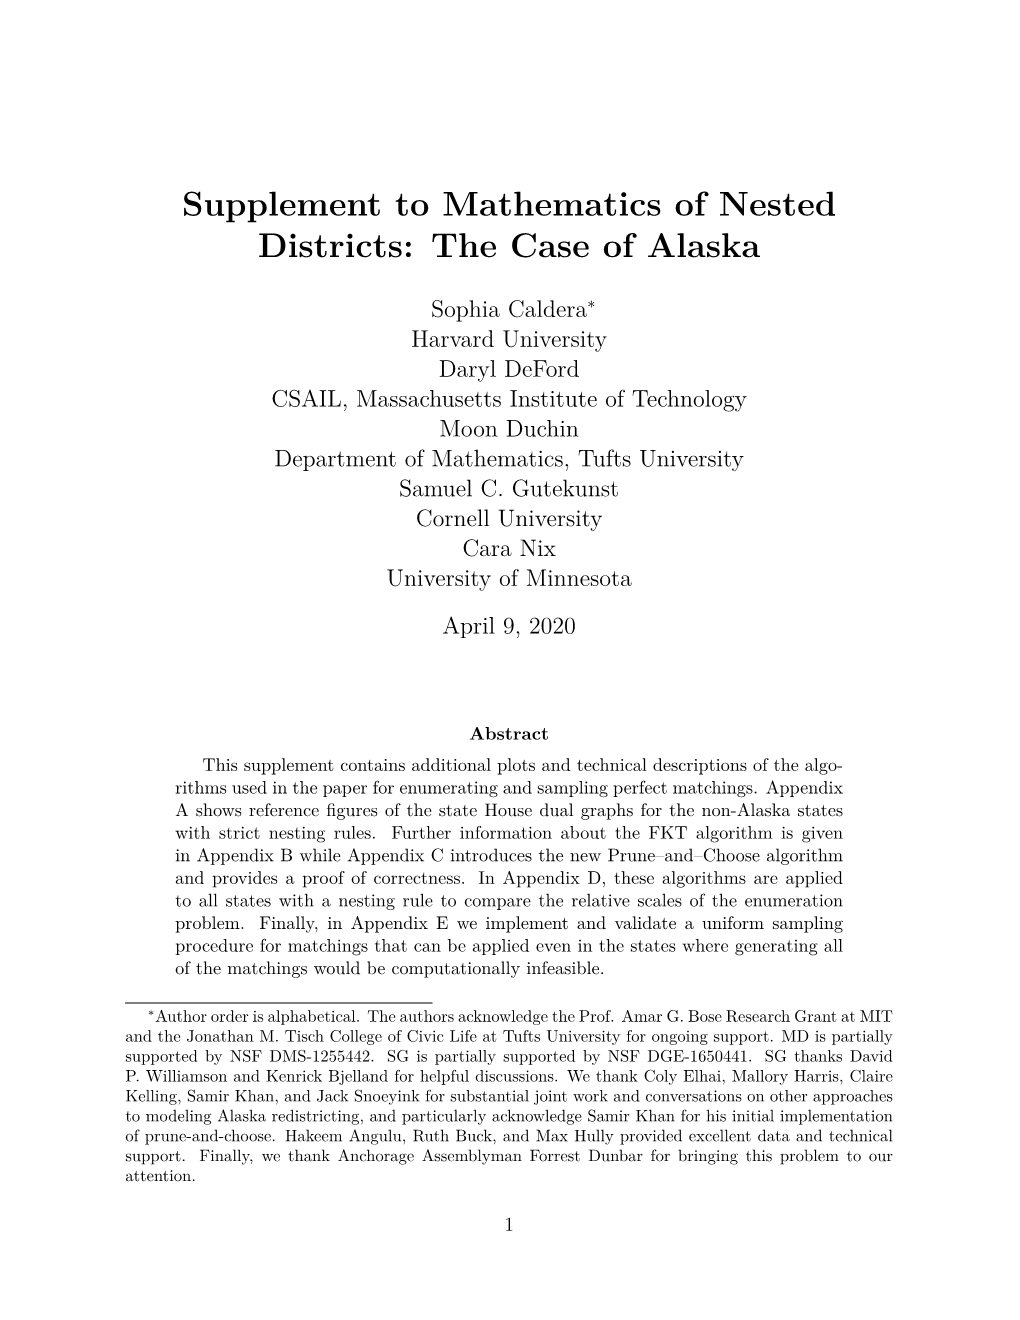 Supplement to Mathematics of Nested Districts: the Case of Alaska